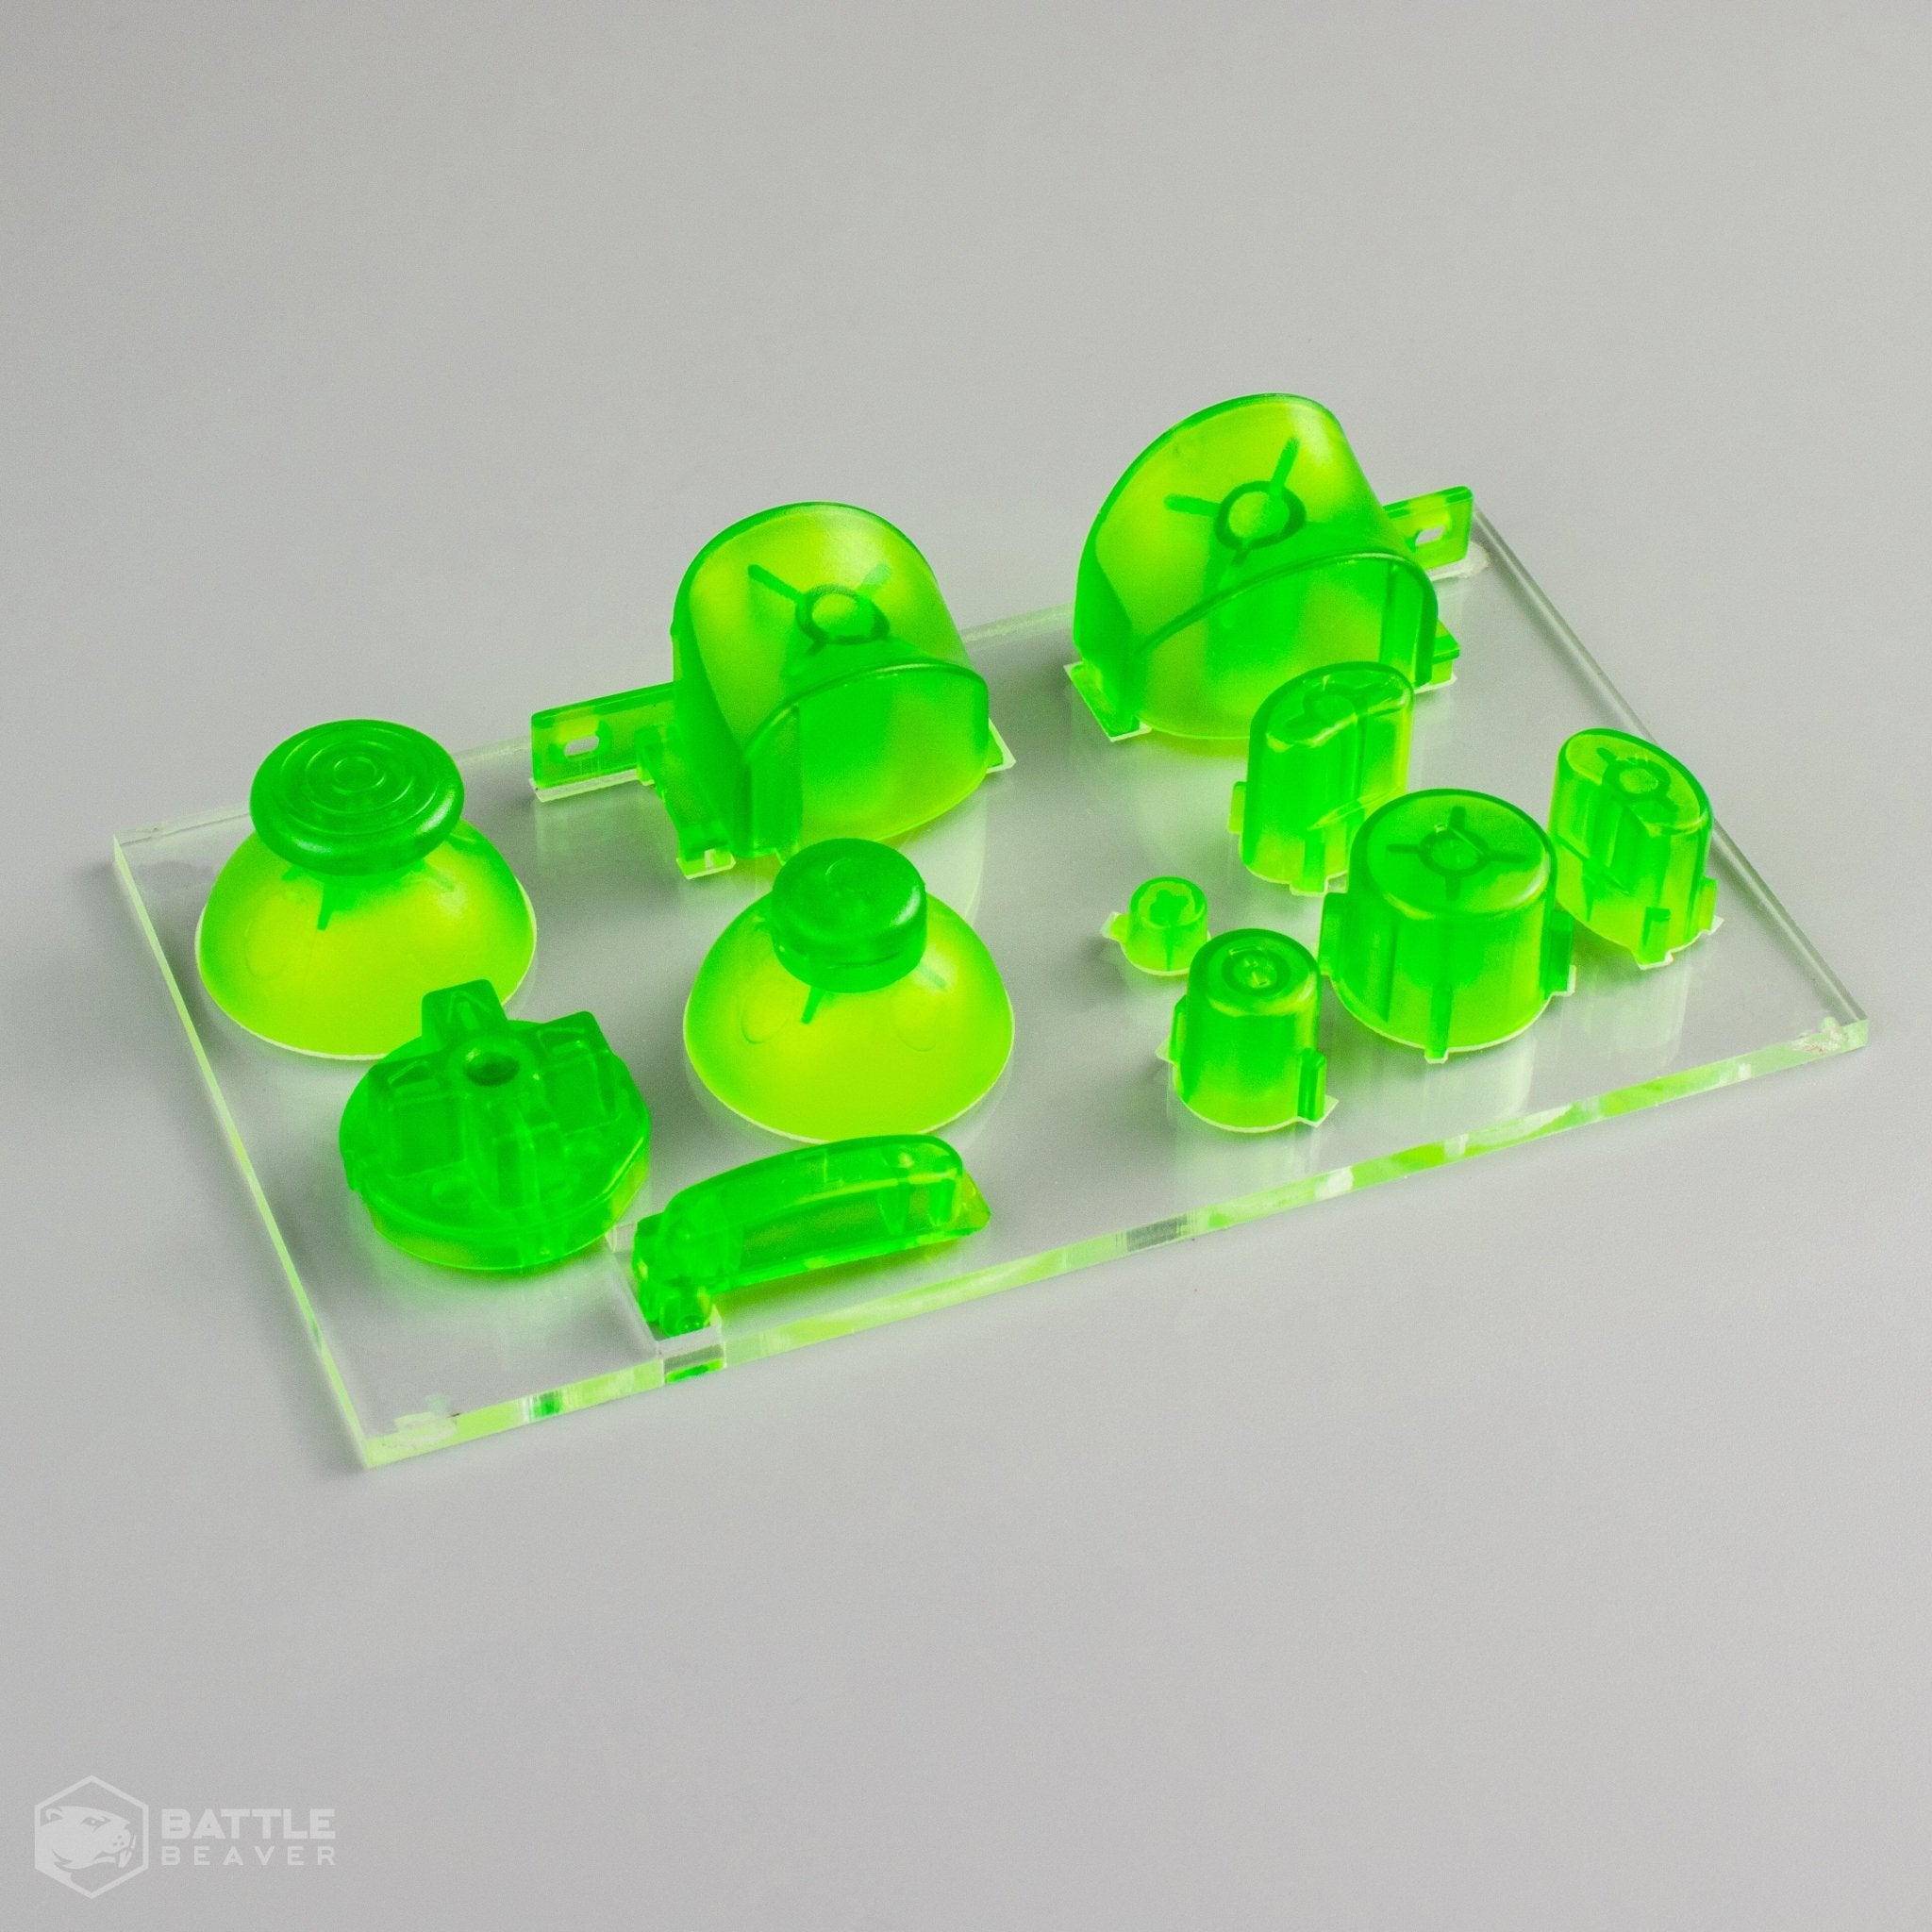 3rd Party Gamecube Parts Kit - Battle Beaver Customs - Crystal Green